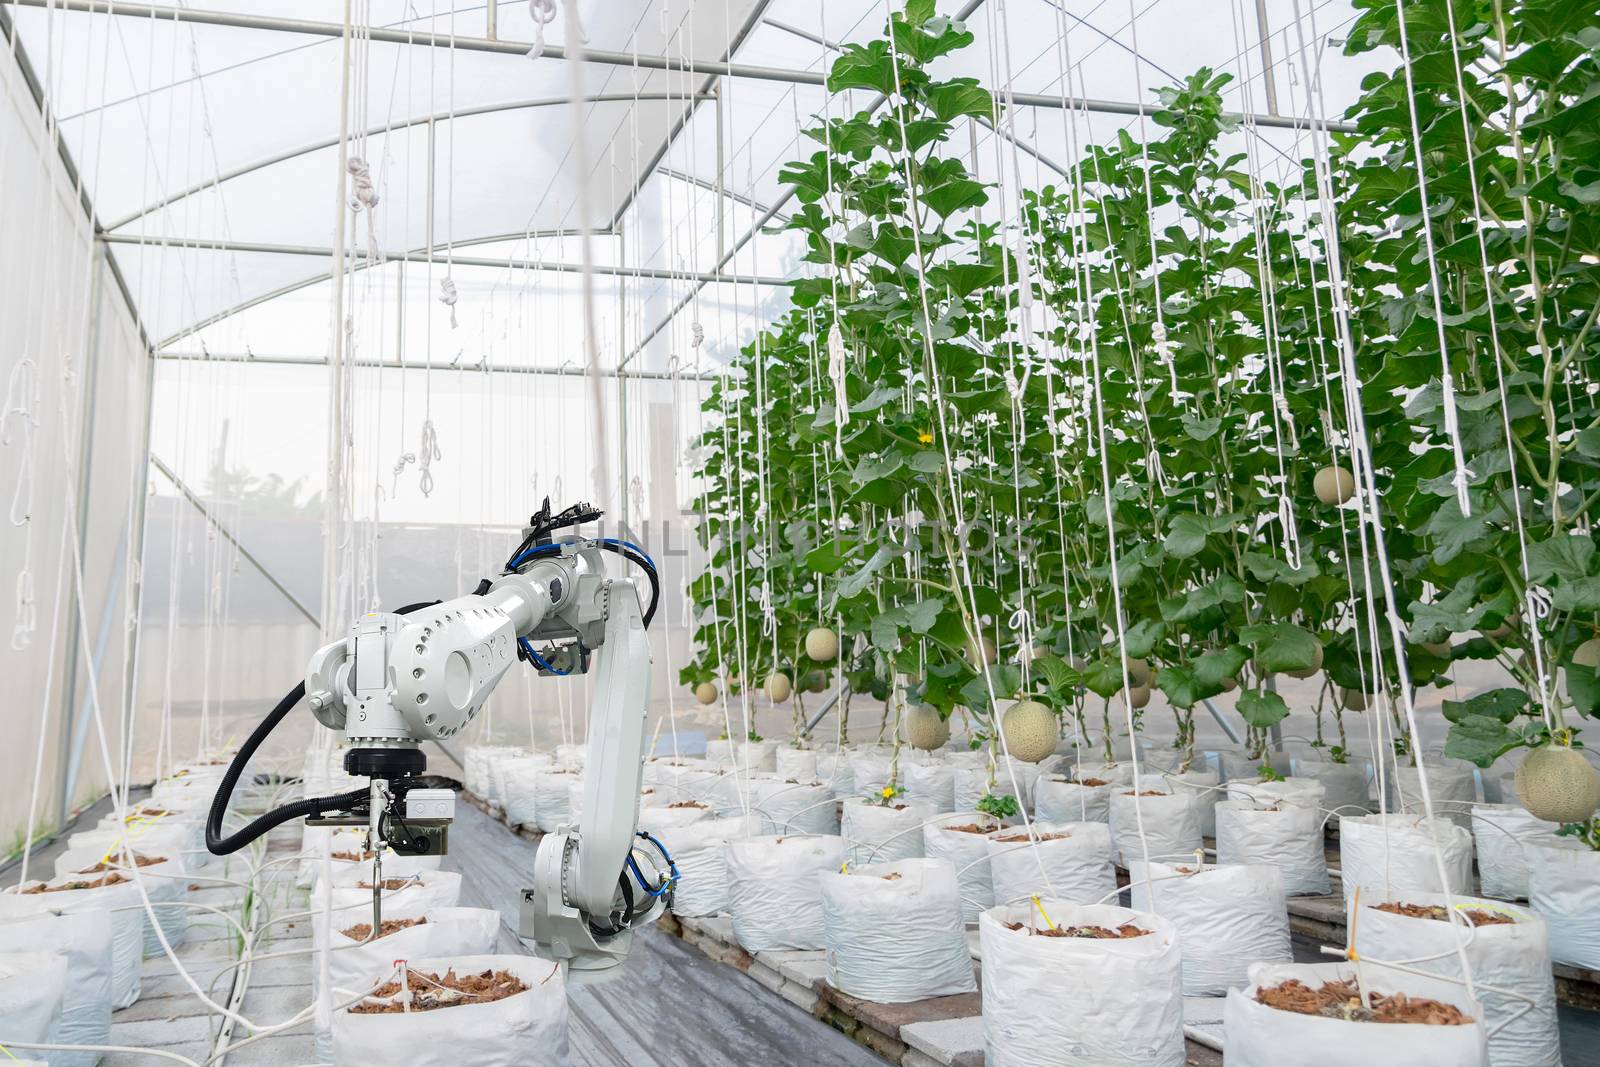 Smart farming fruit melon and digital agriculture Robotic arm is by sompongtom